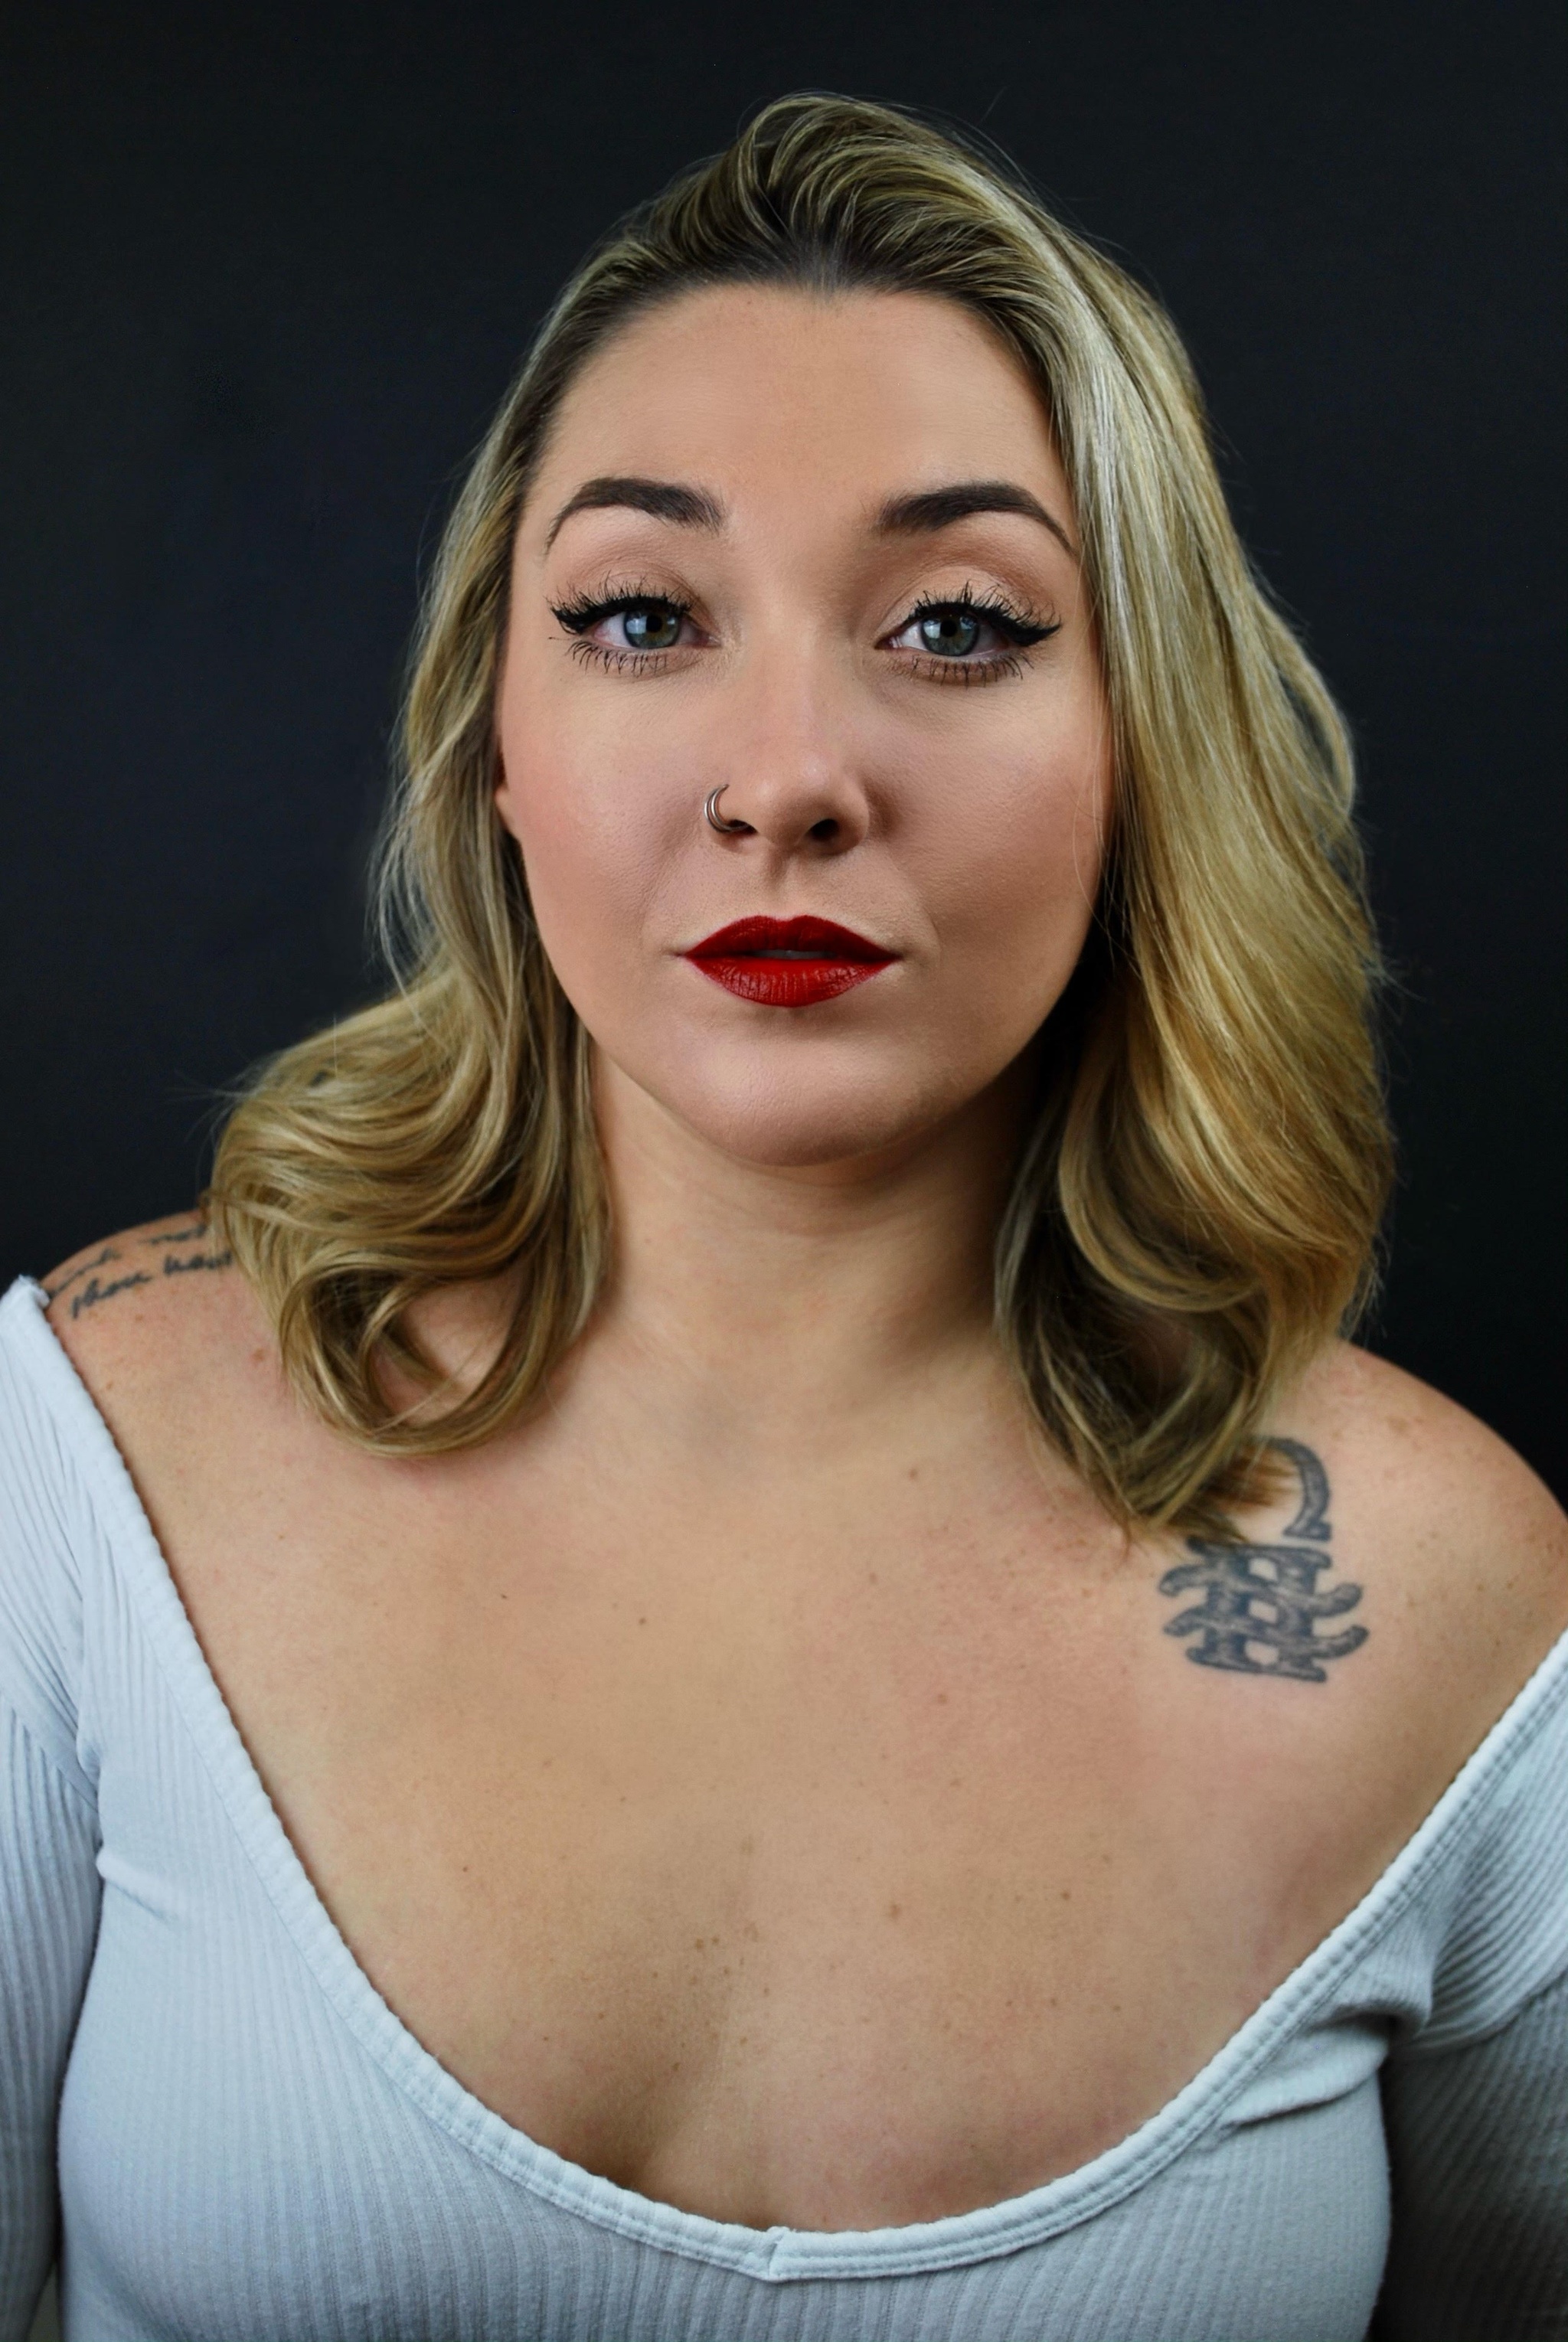 A woman with blond hair looks into the camera. She wears a white top that is low cut across her chest and shoulders and has a tattoo on her left shoulder. 